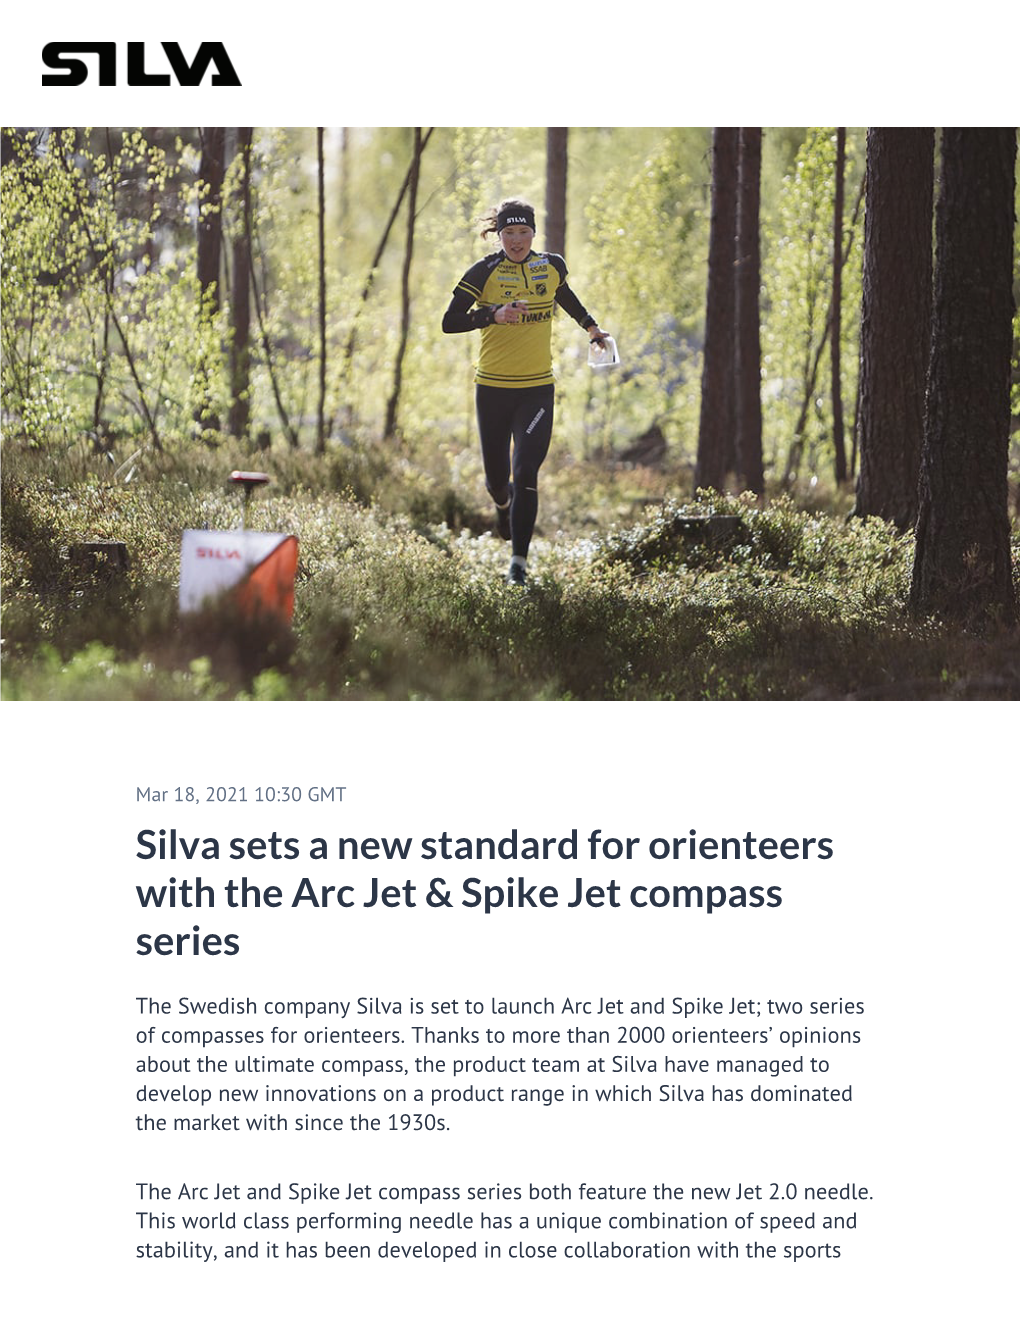 Silva Sets a New Standard for Orienteers with the Arc Jet & Spike